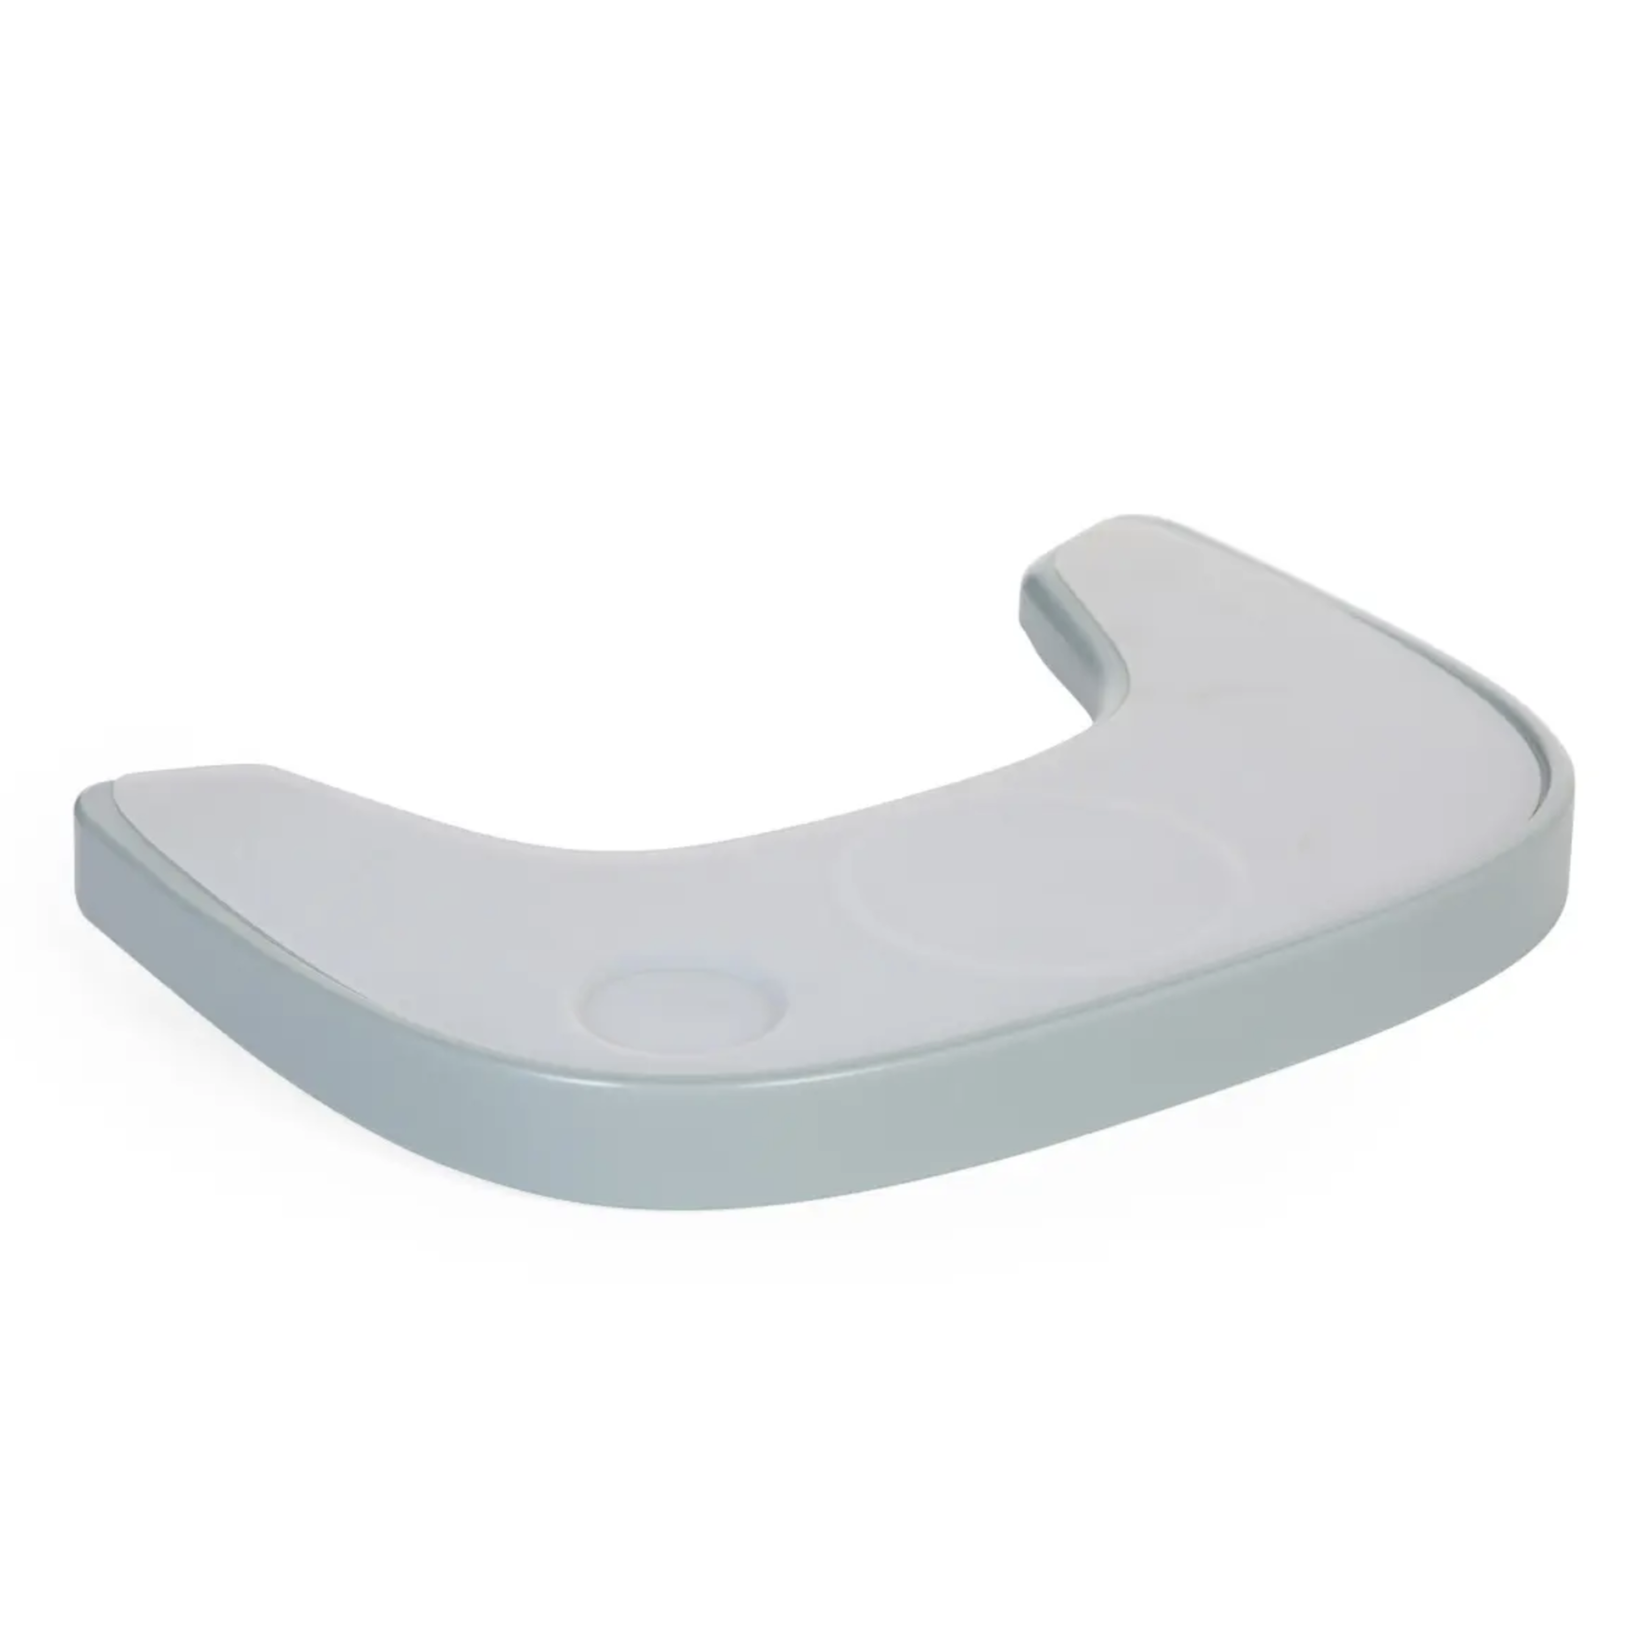 Childhome Tray ABS Mint